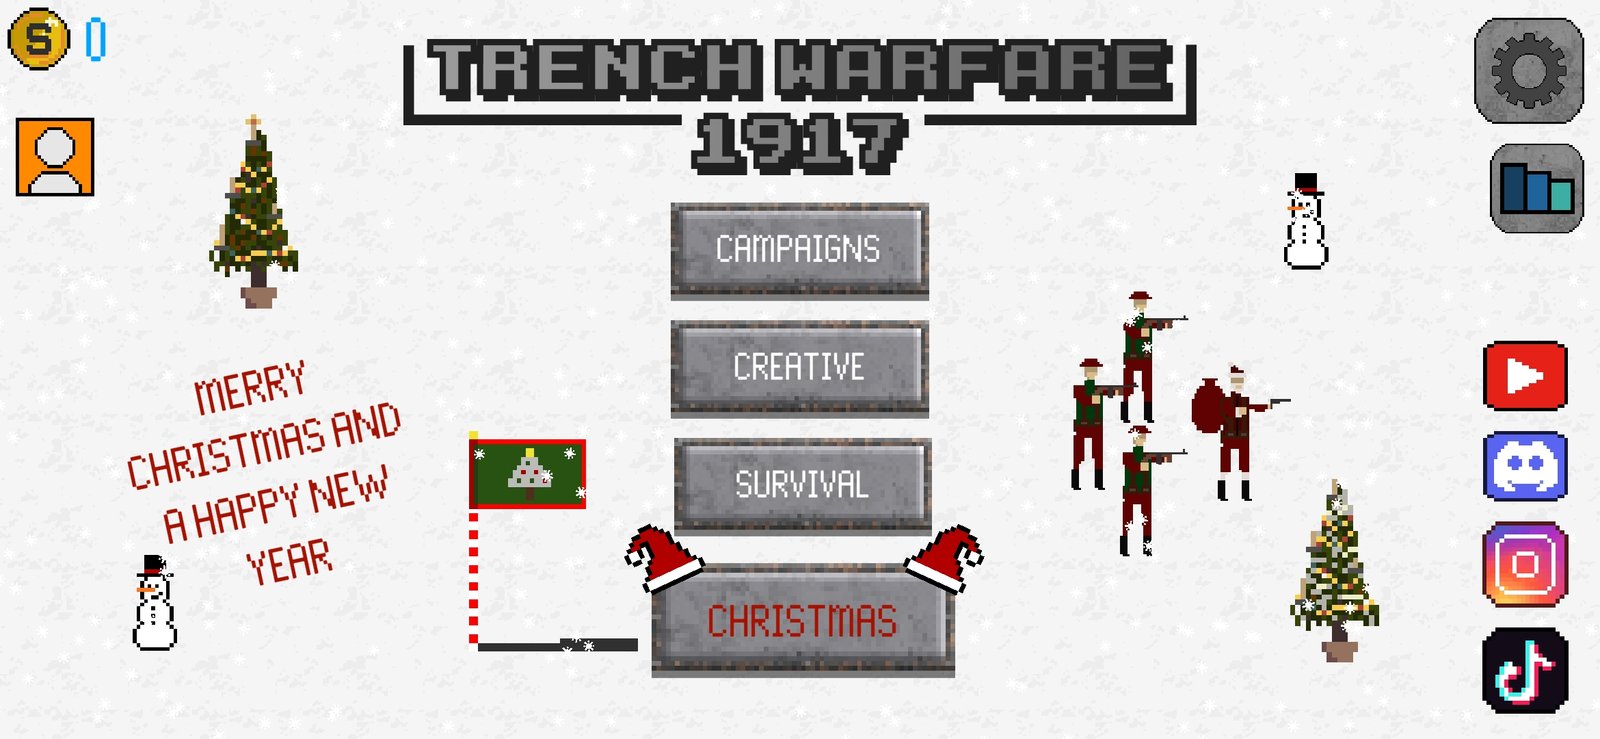 Trench Warfare 1917: WW1 Game para iPhone - Download